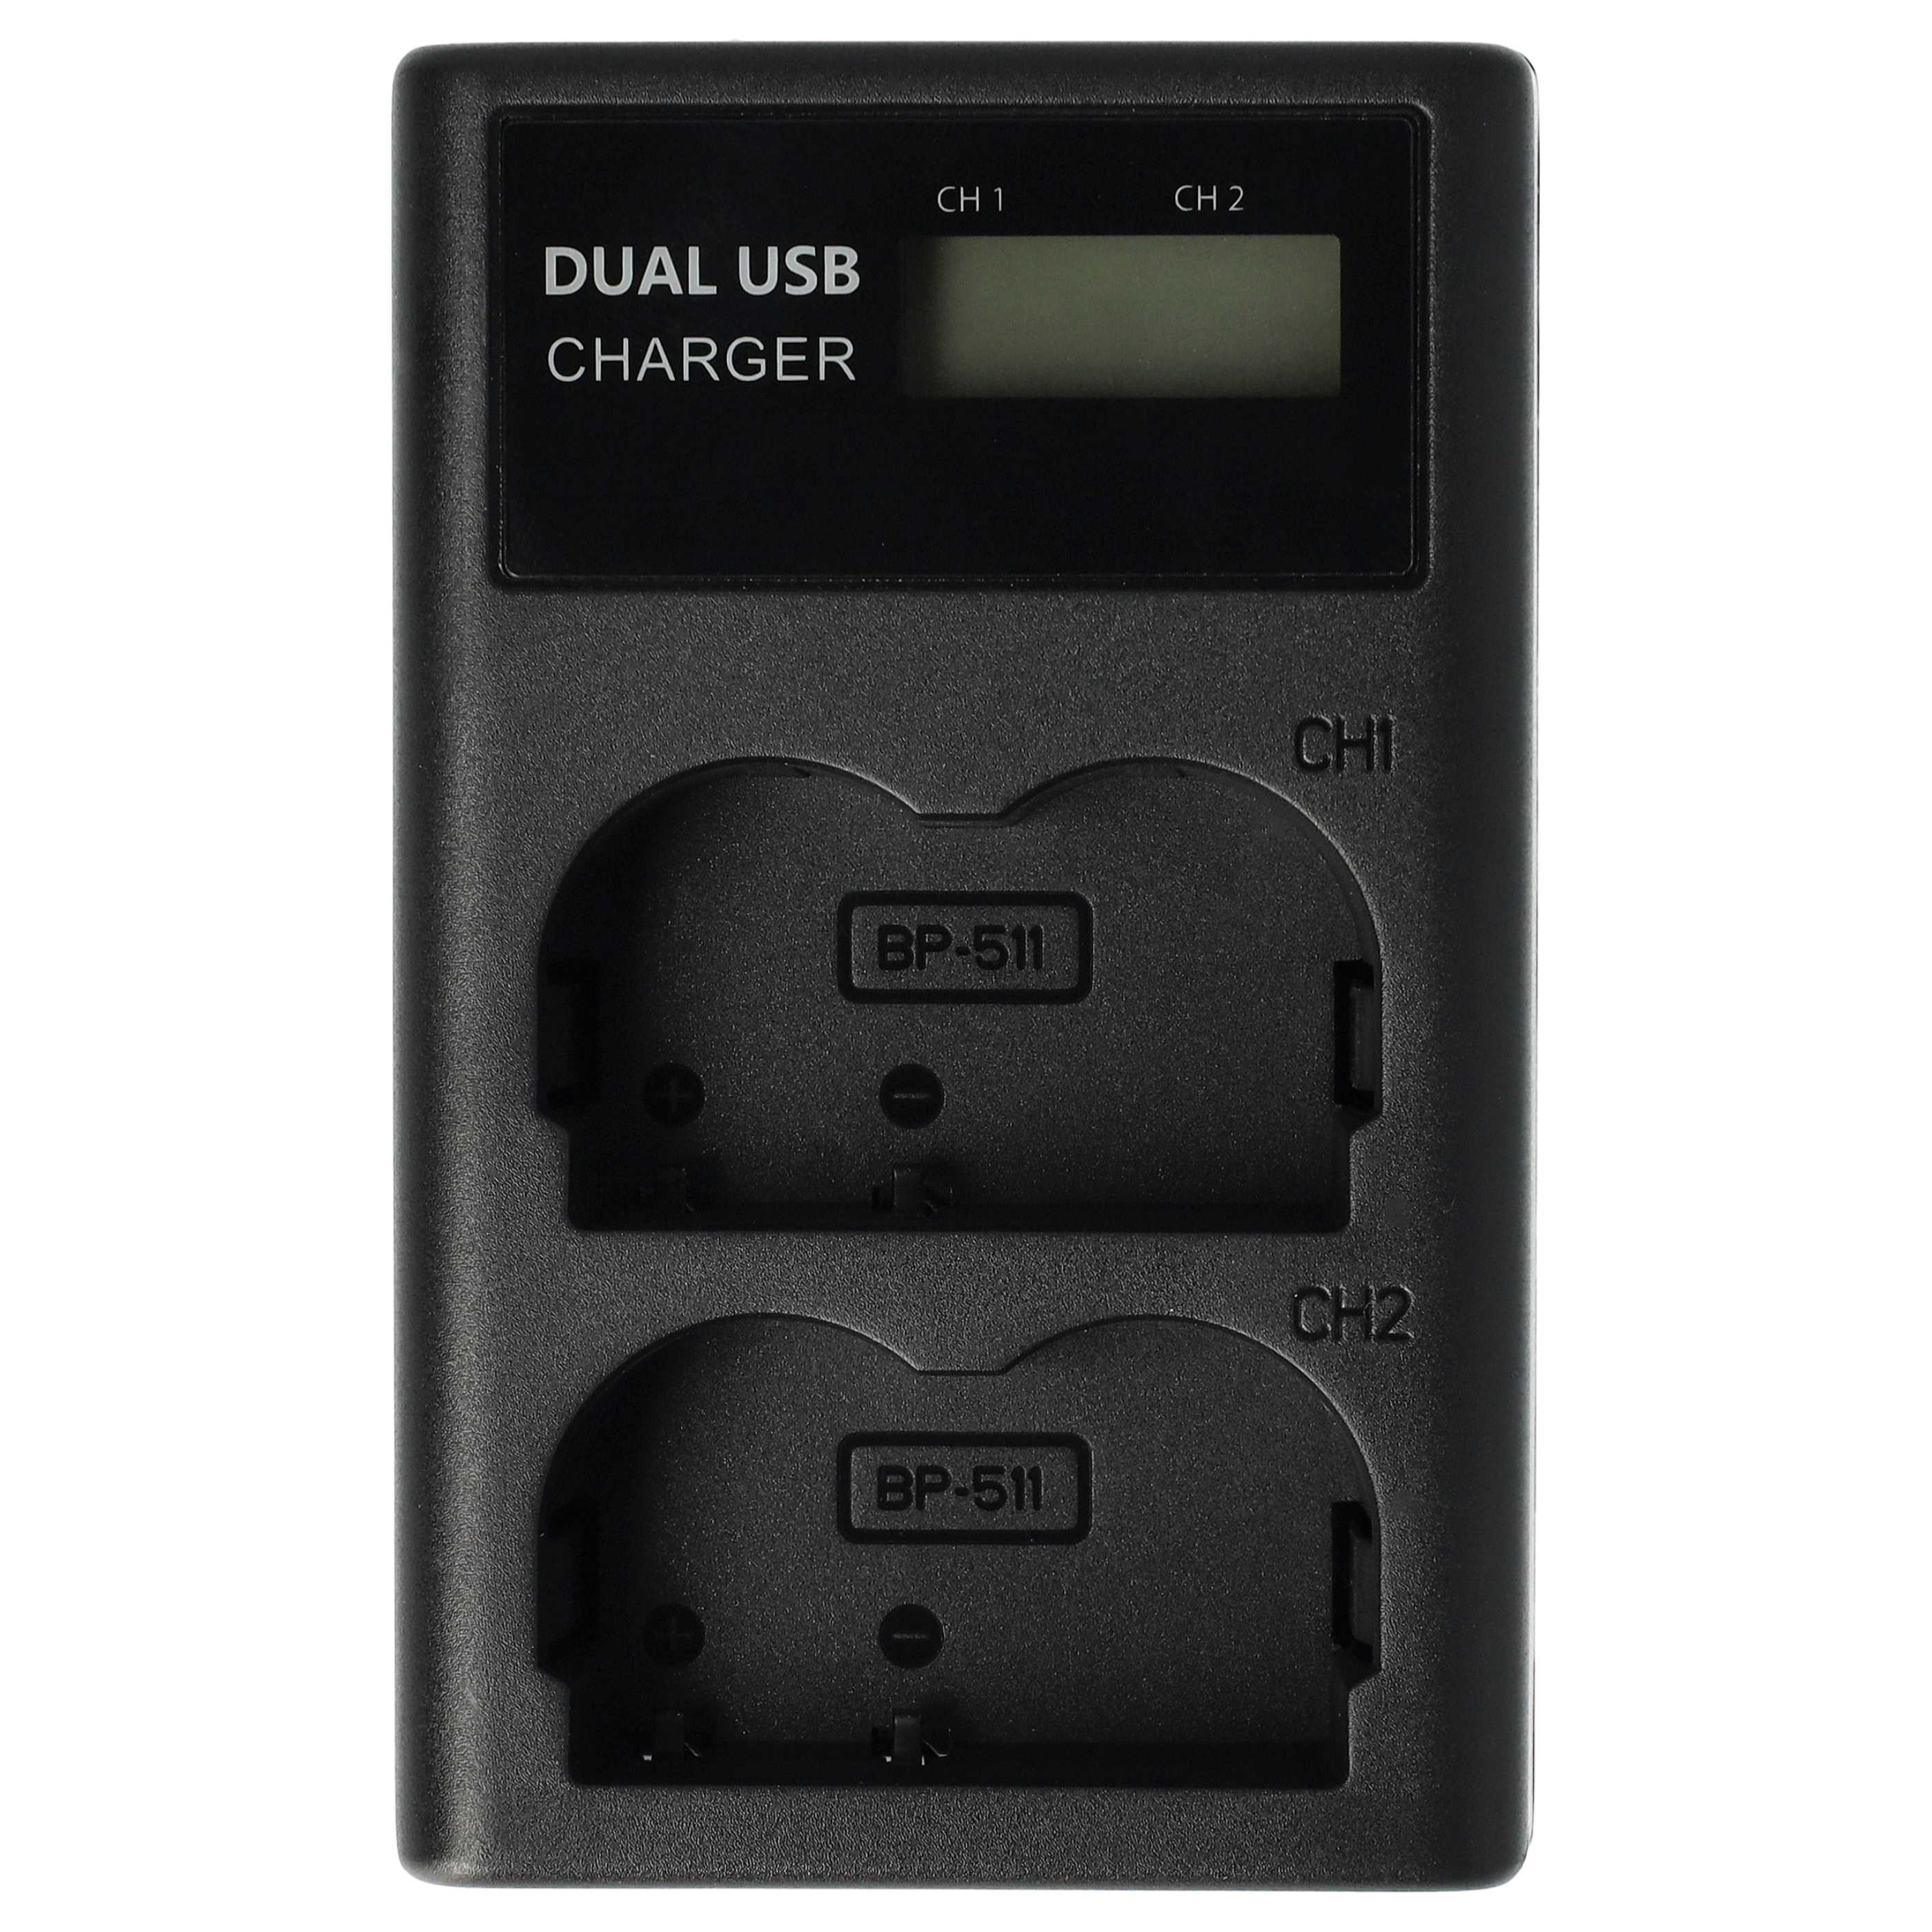 Battery Charger suitable for Canon BP-508 Camera etc. - 0.5 A, 8.4 V